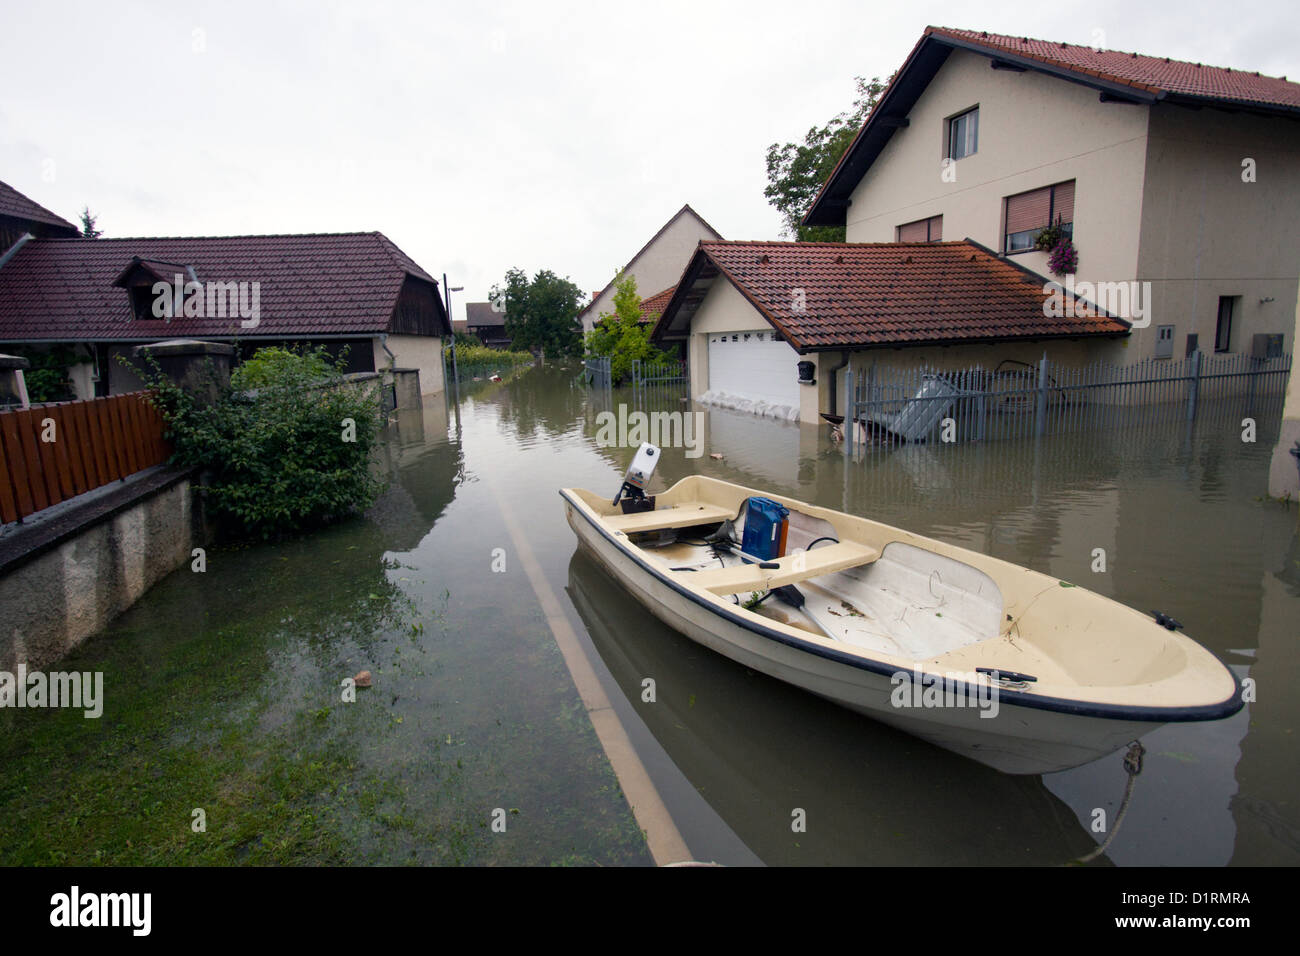 Flooded house after heavy rain with motor boat on the street. Stock Photo